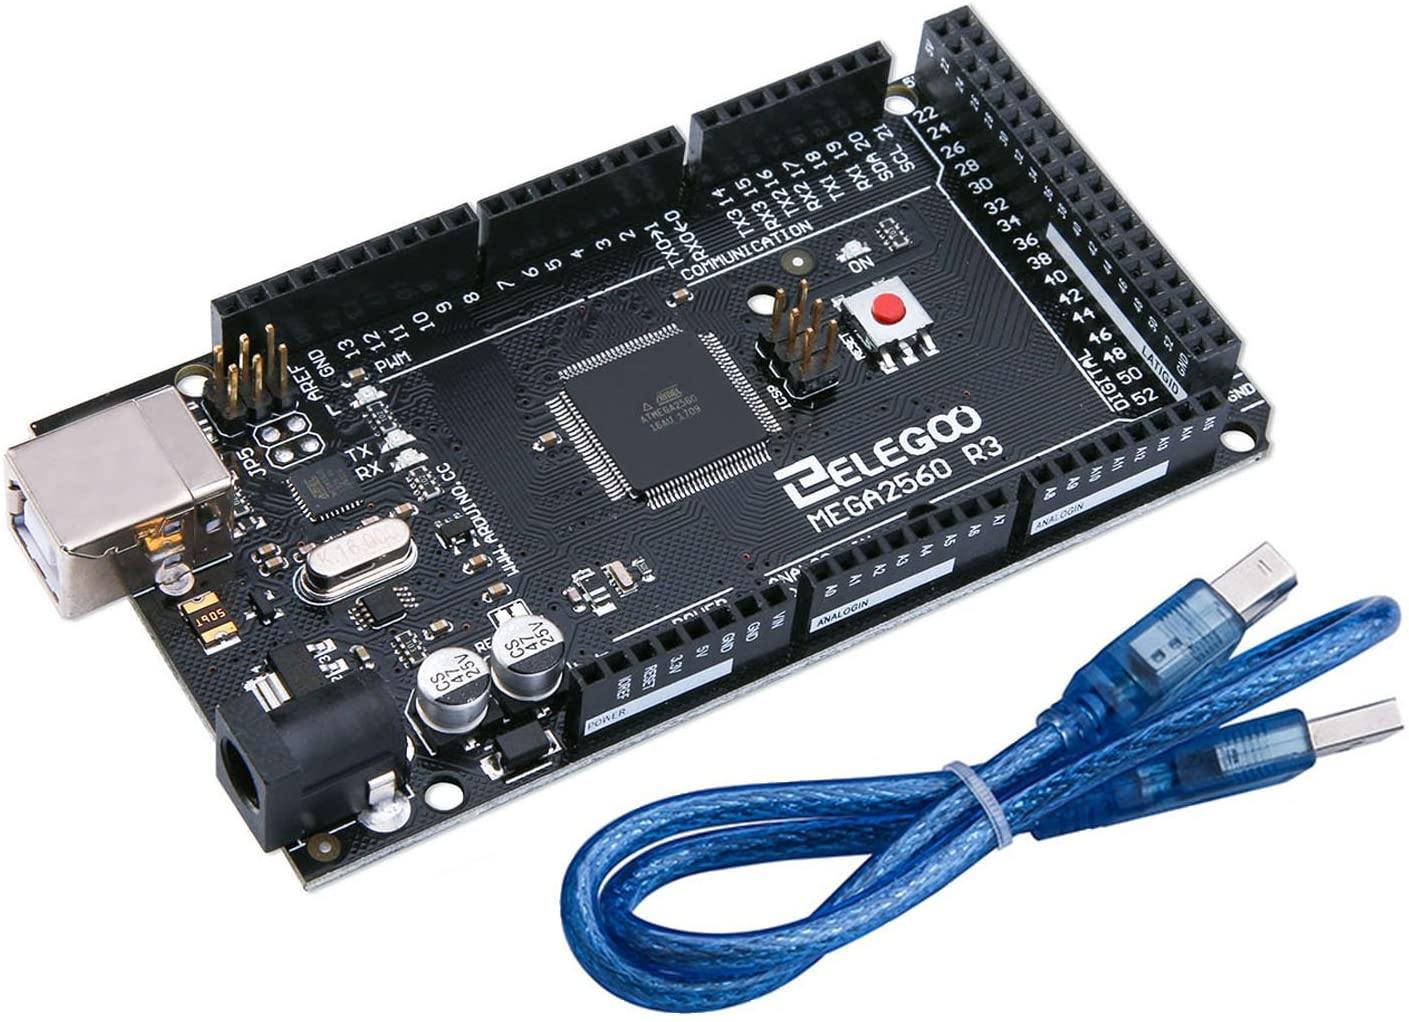 ELEGOO MEGA 2560 R3 Board with USB Cable Compatible with Arduino